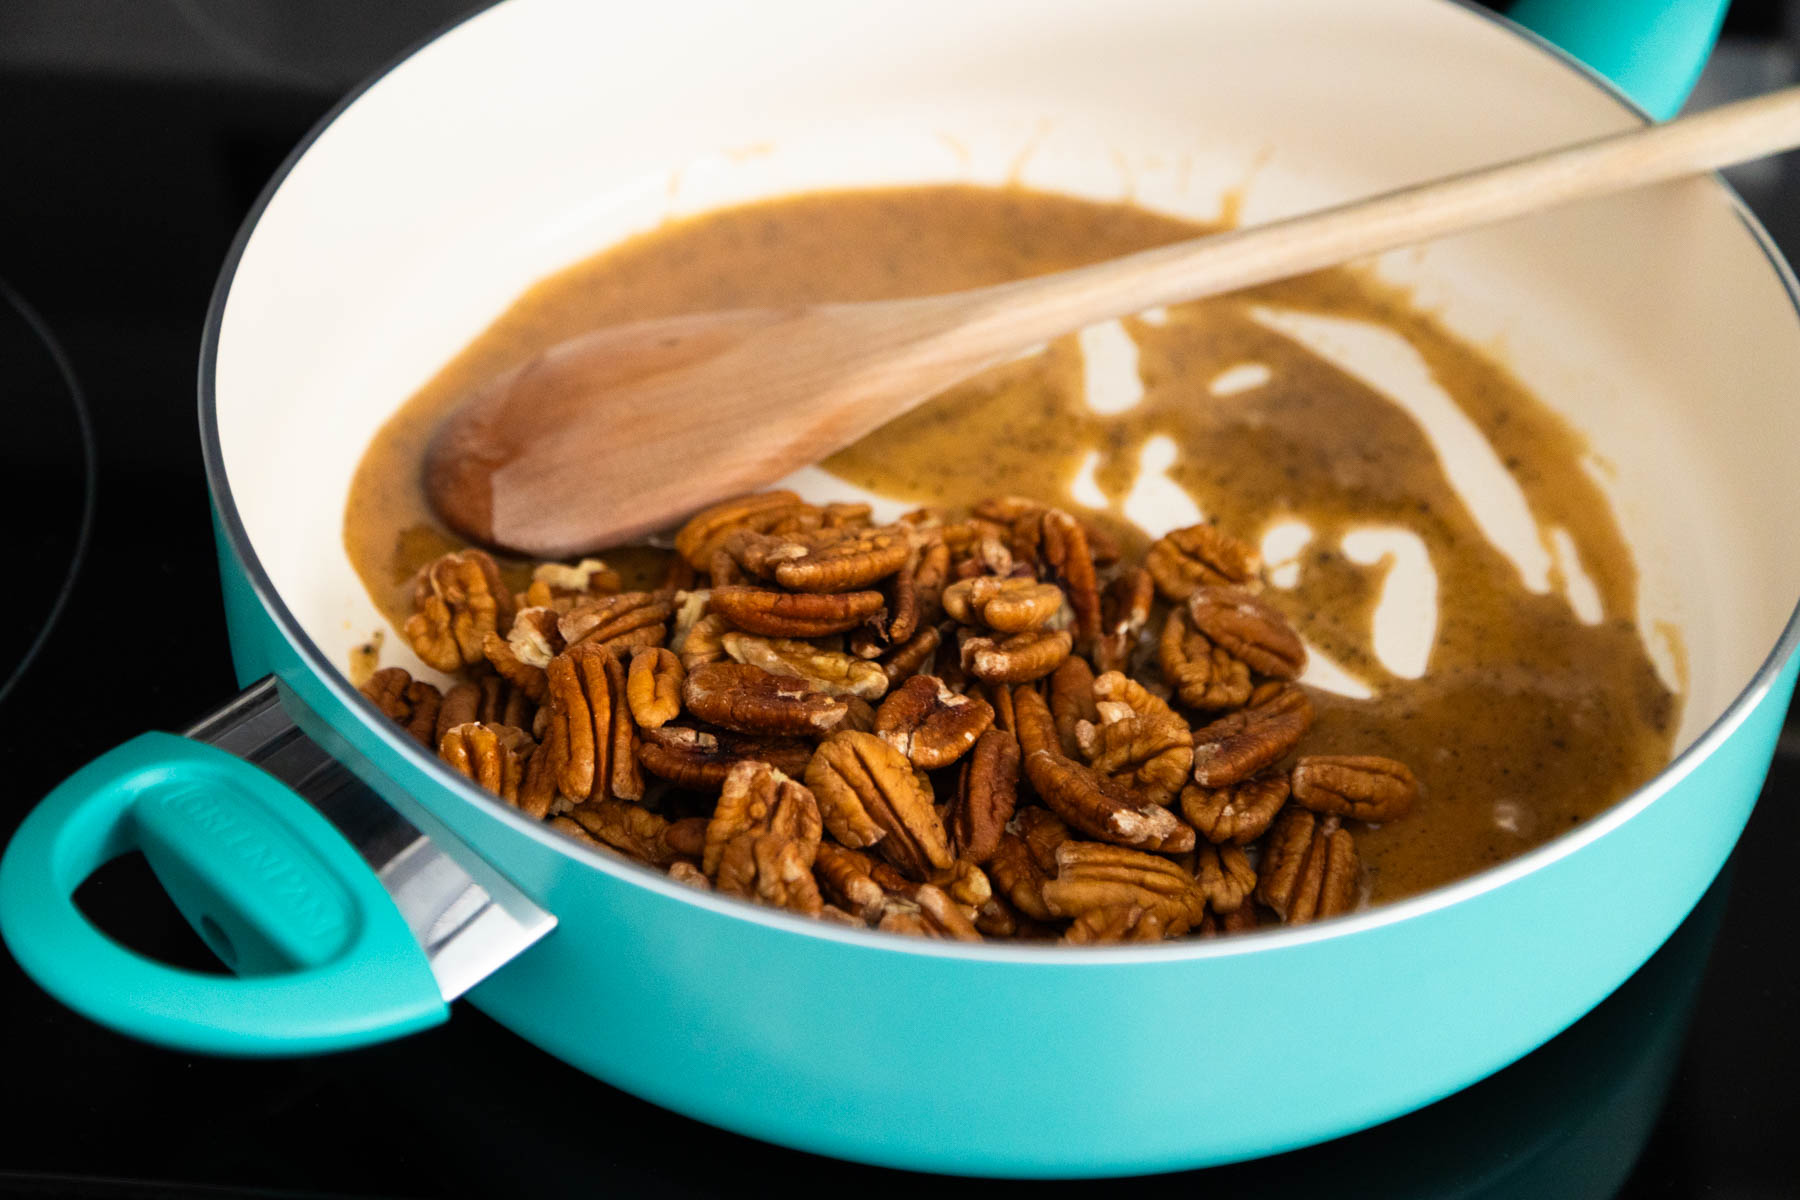 The pecans are in a large skillet with the melted glaze.